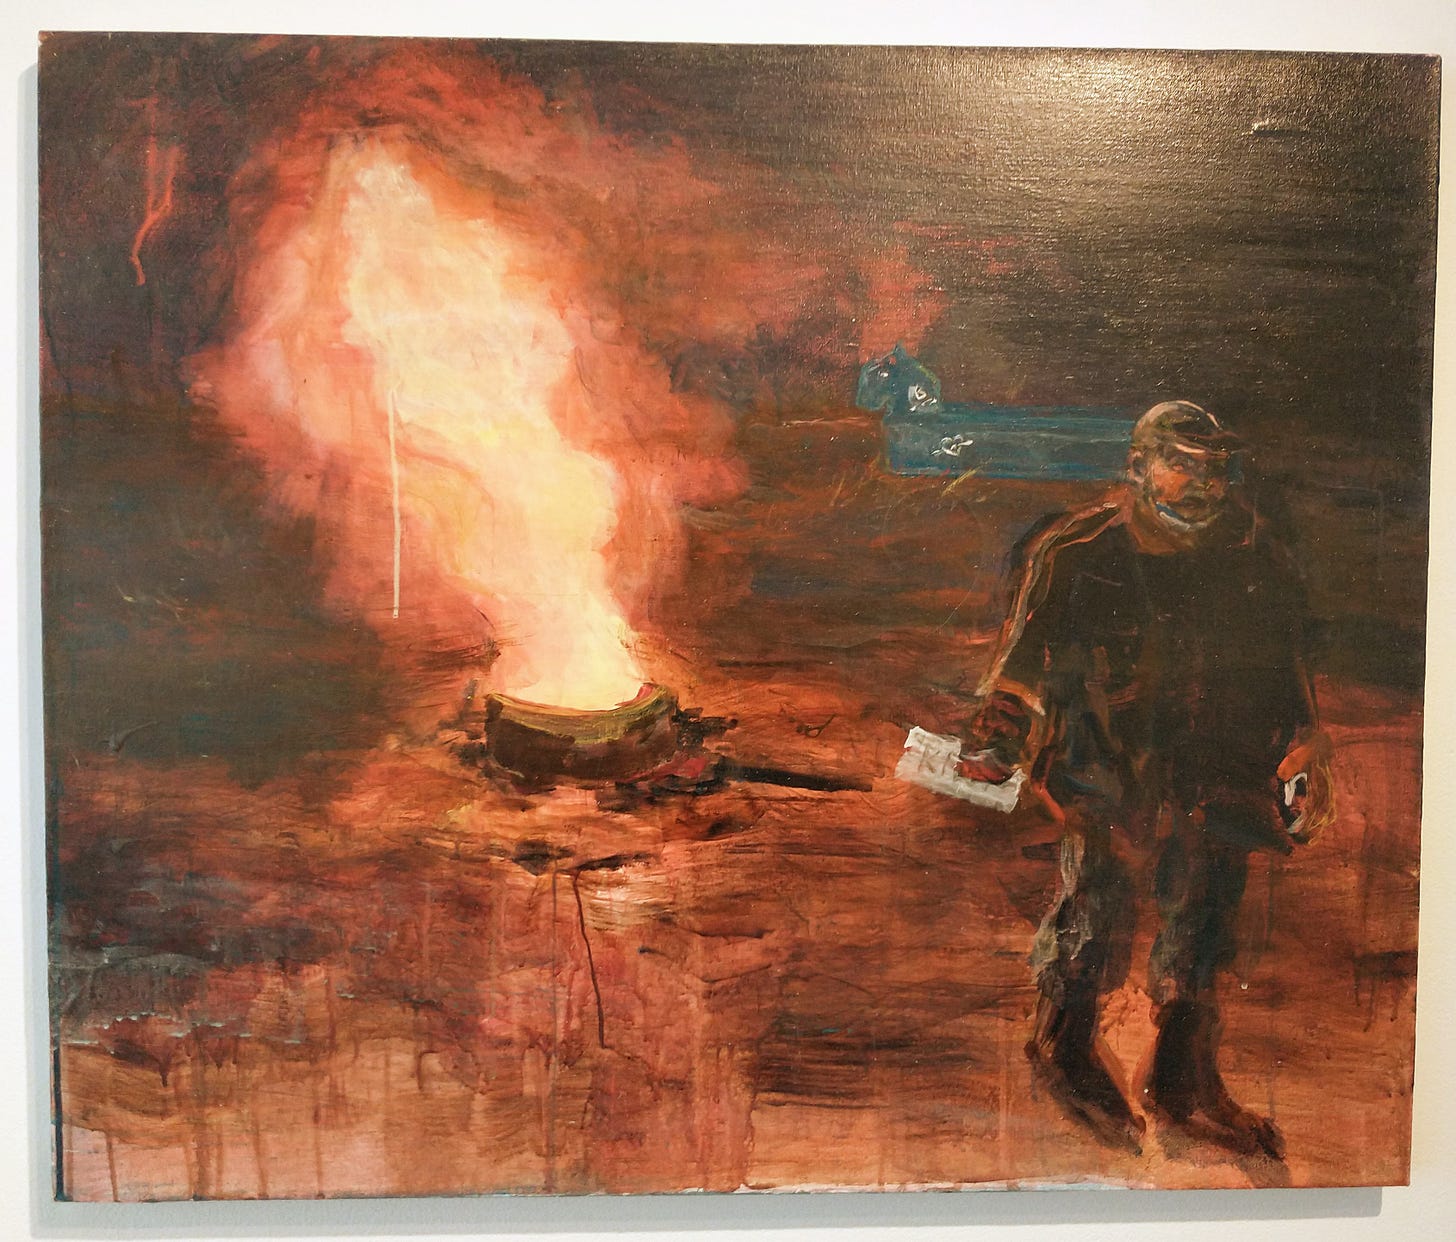 Painting of a glowing fire  with a man walking away holding something white, and a blue horse figure in the background